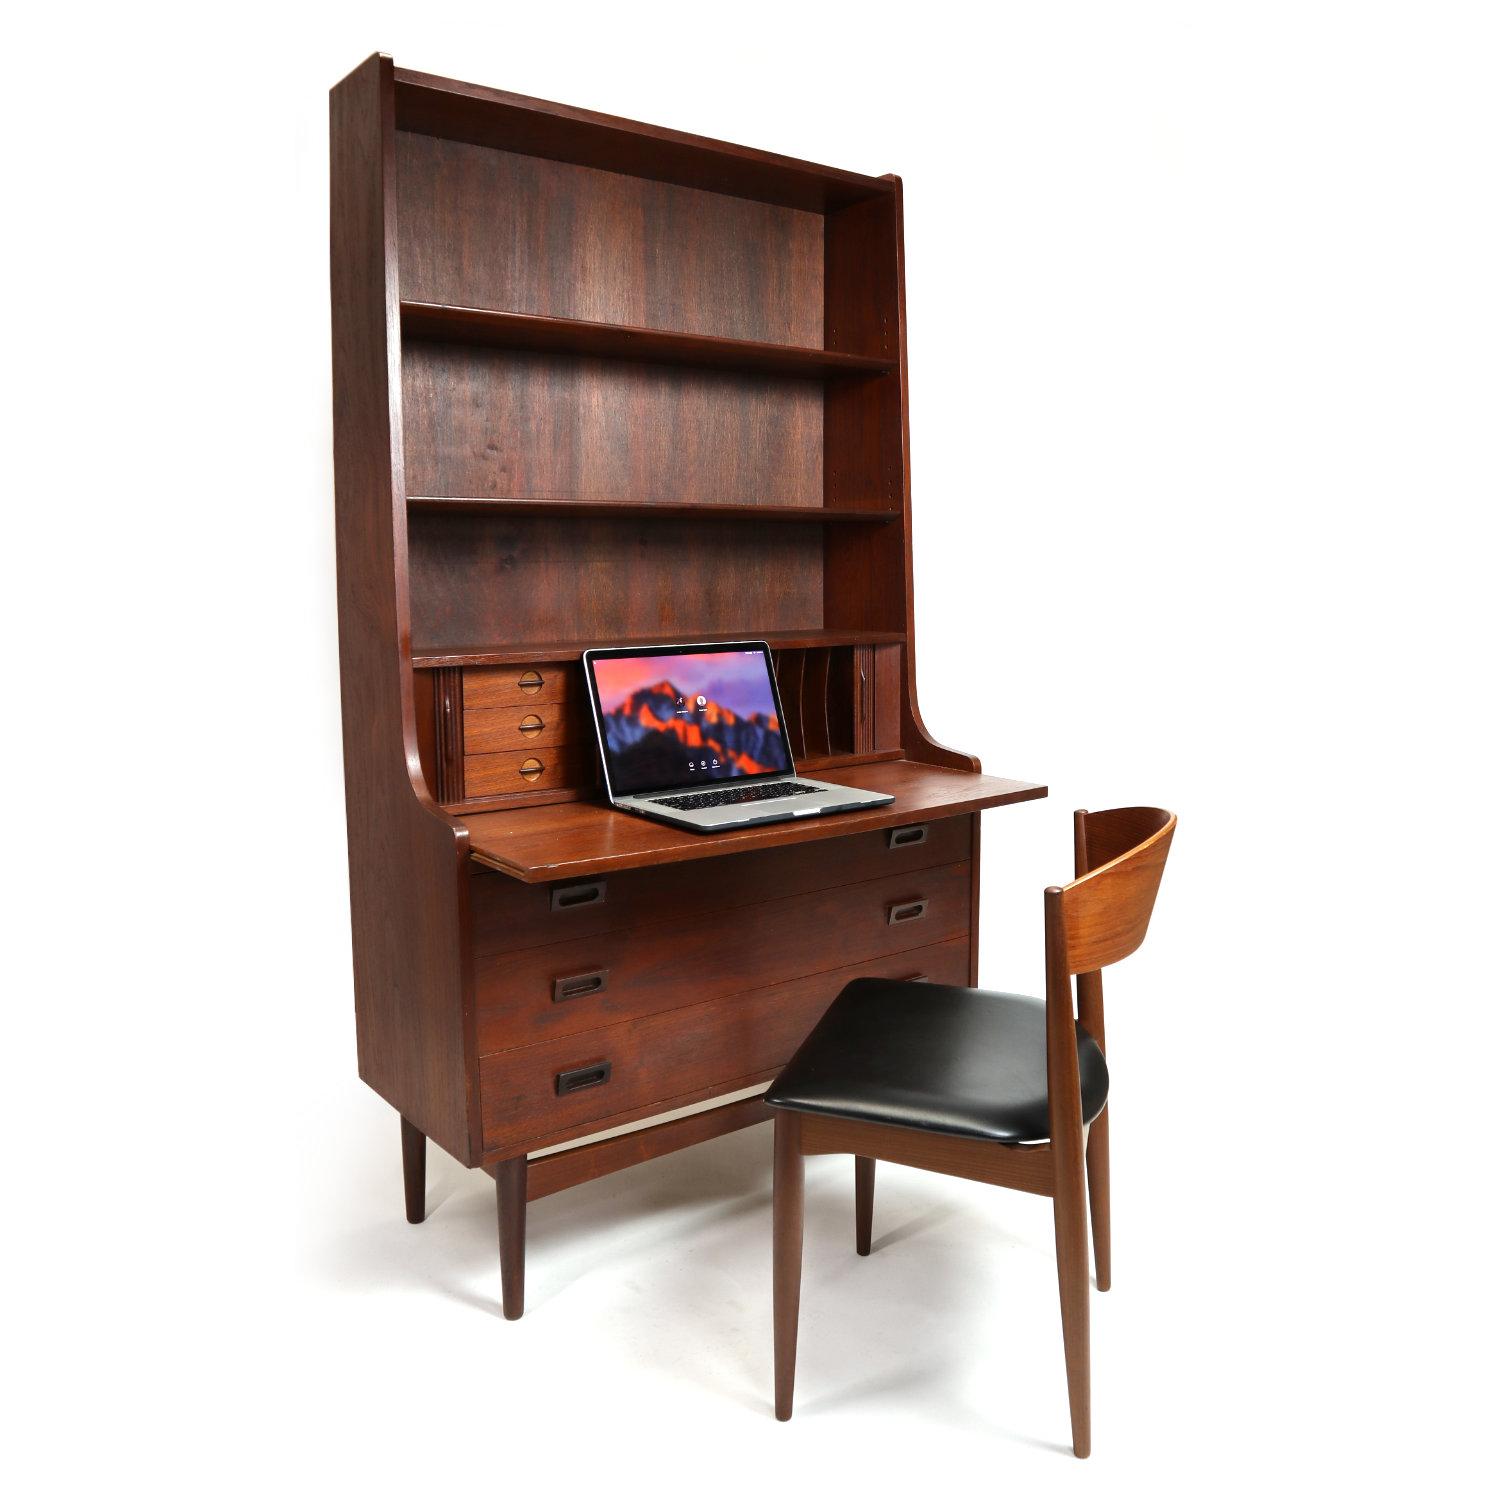 Borge Mogensen early Mid-Century Modern Danish teak desk. The stately piece has a deep red-orange patina from over half a century of age. We seldom find these early pieces these days. Maximize utility with this piece. It is simultaneously a bookcase